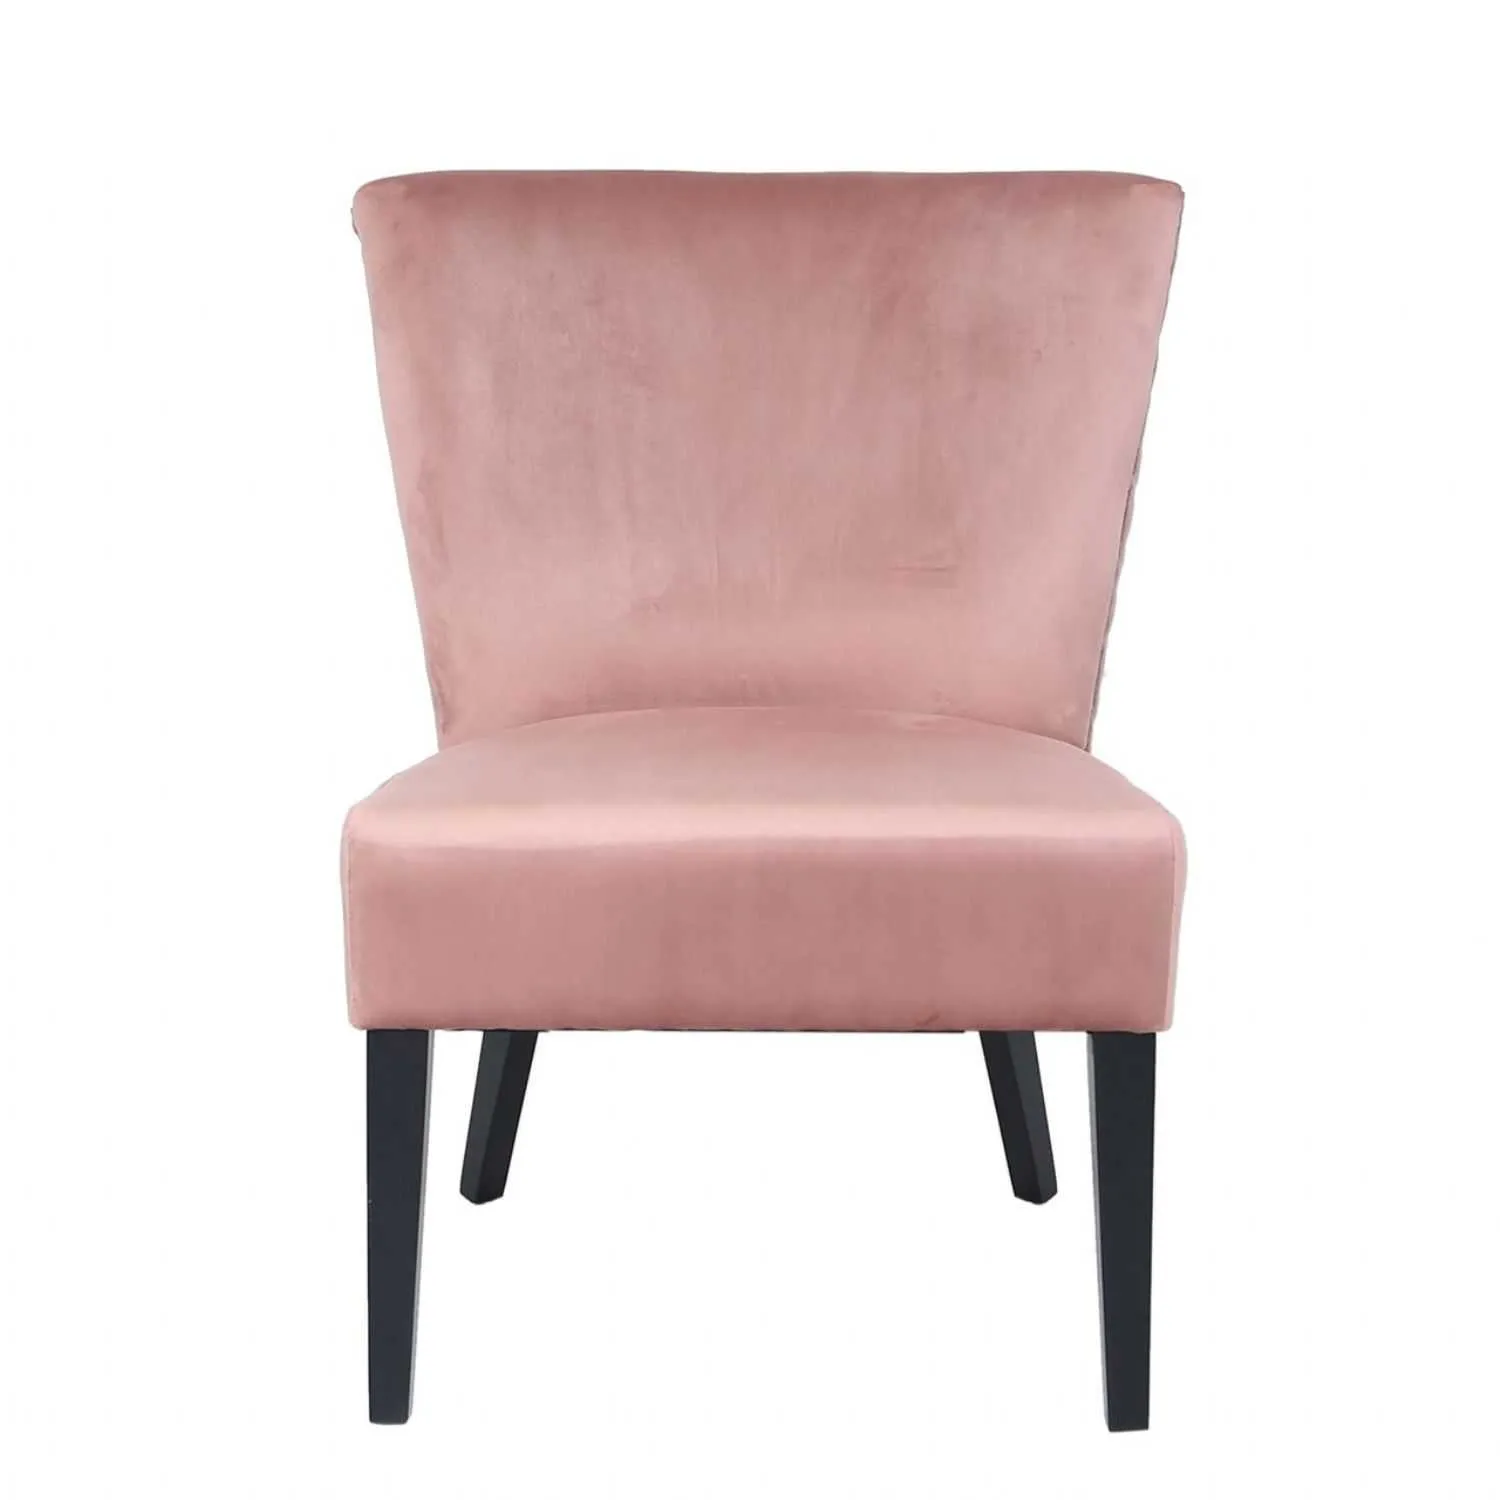 Blush Pink Curved Back Chair